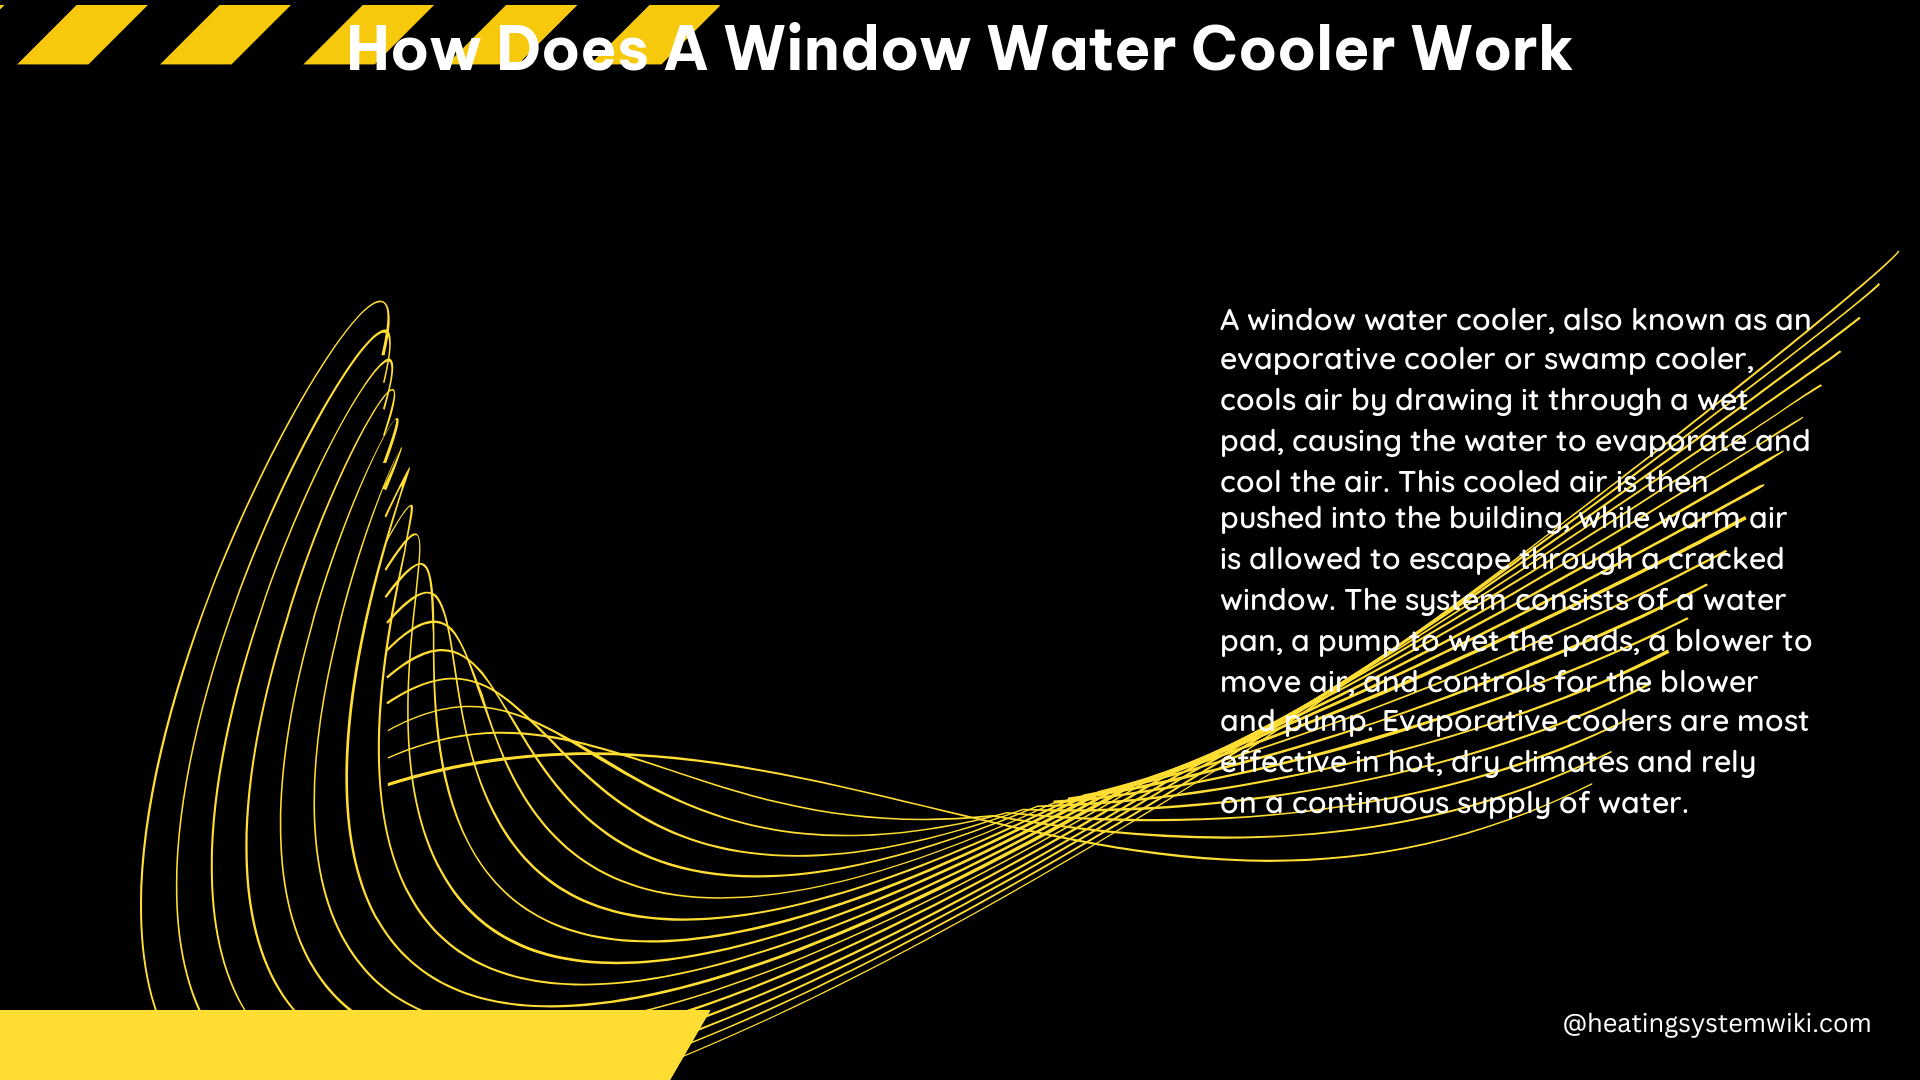 How Does a Window Water Cooler Work